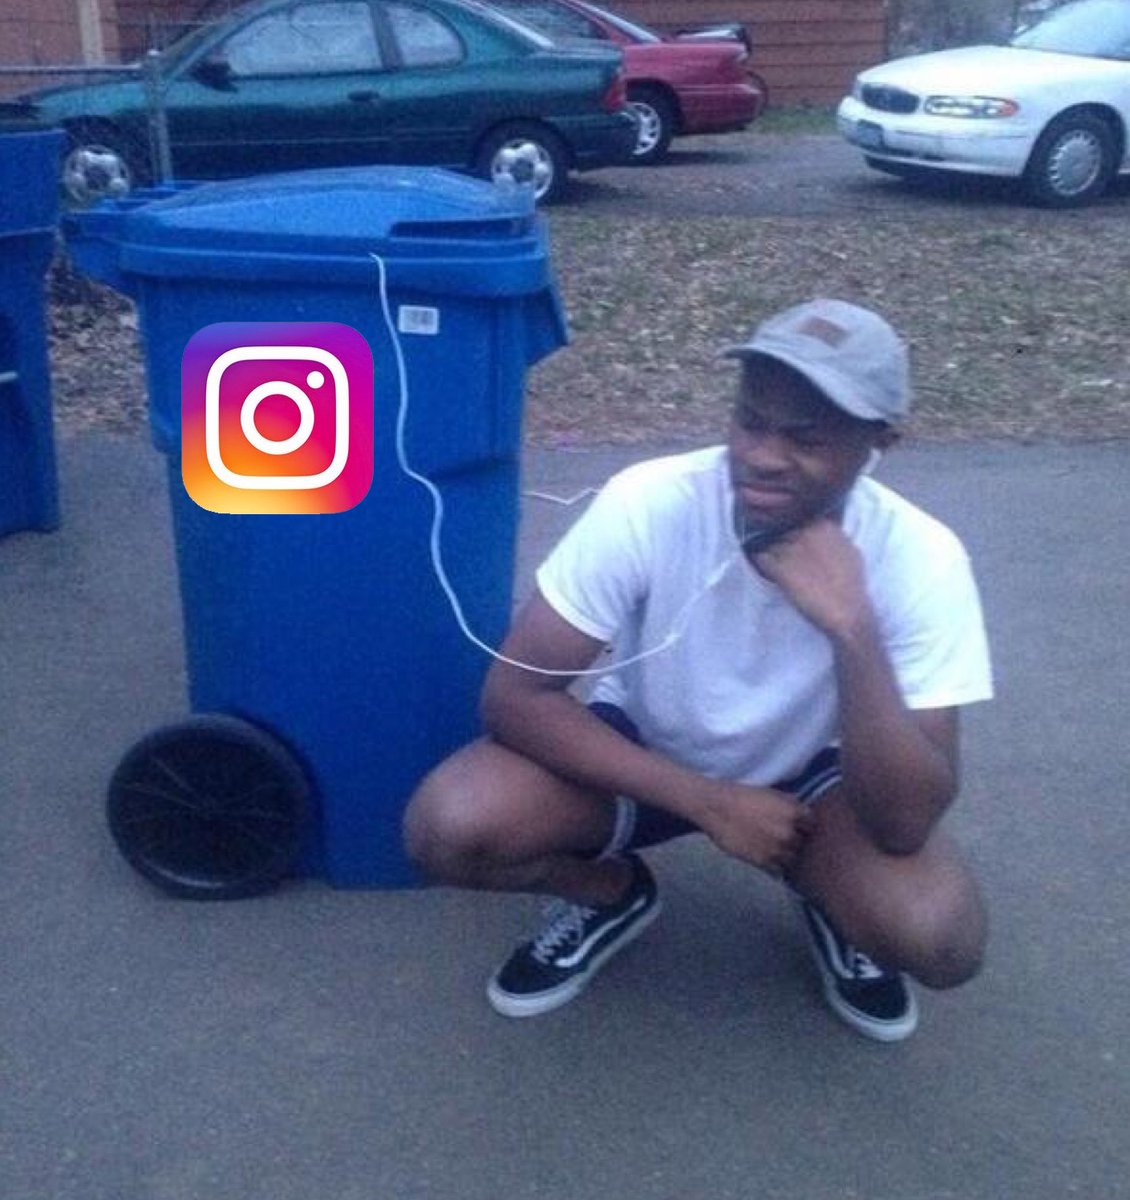 Instagram is the most deleted social media app in 2023.

According to a recent report by US-based tech firm TRG Datacentres, over 1 million people worldwide searched 'how to delete (my) Instagram account' each month in 2023.